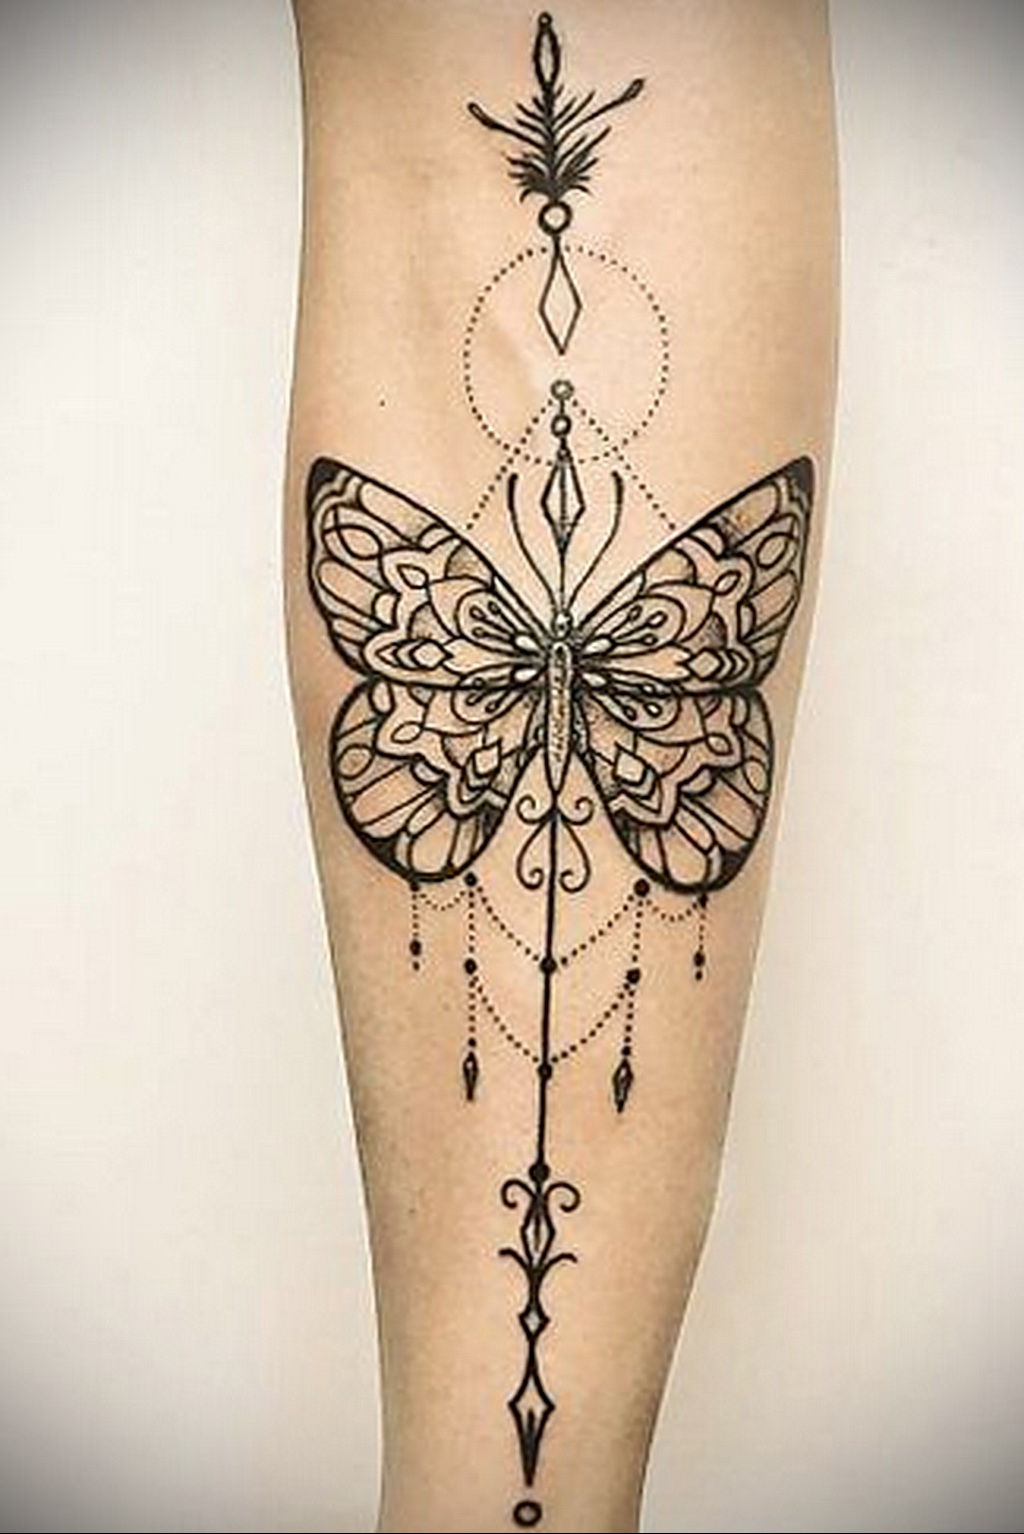 Mandala tattoo with butterfly image